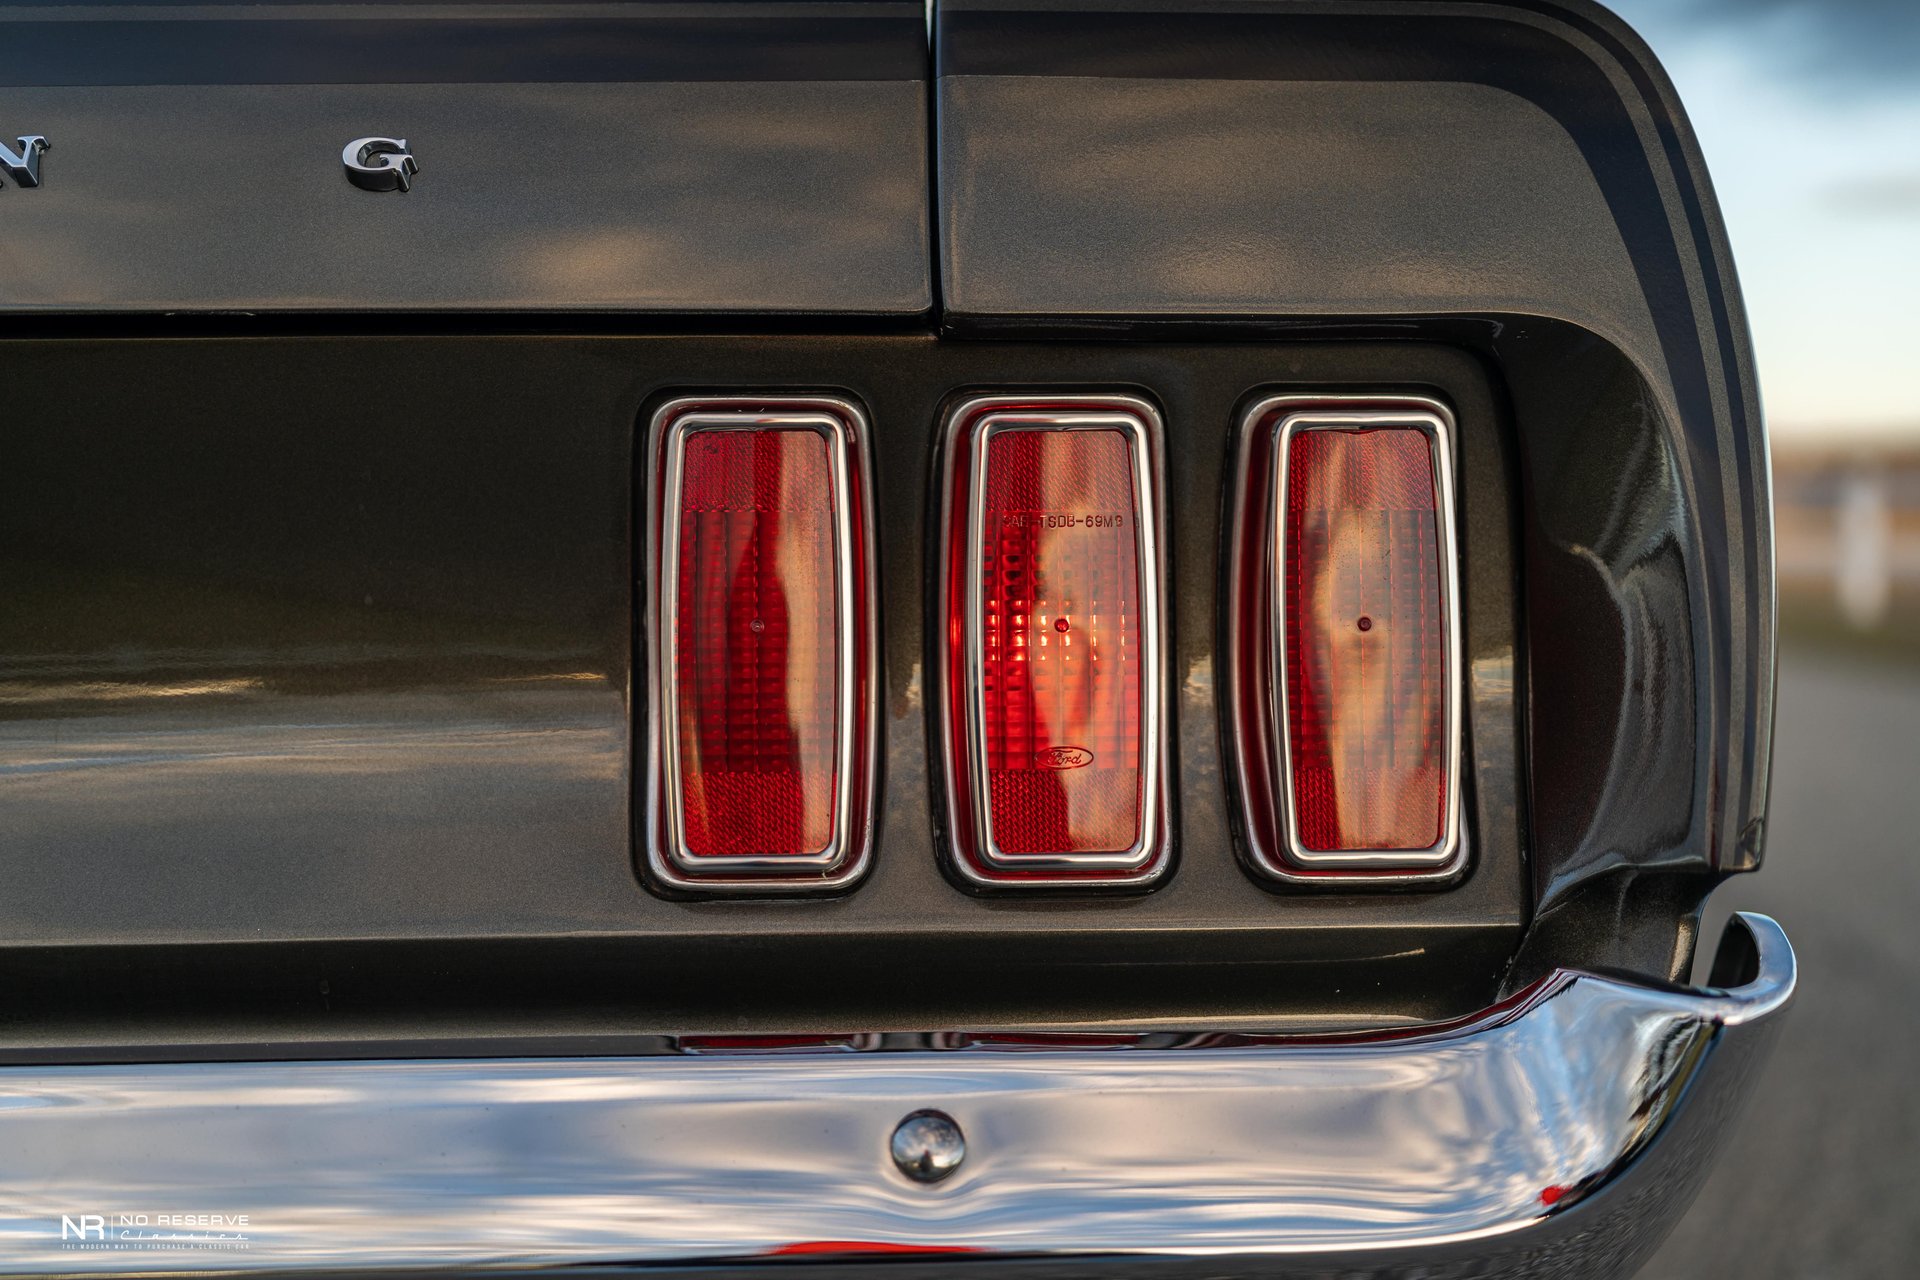 For Sale 1969 Ford Mustang Mach 1 428 Cobra Jet